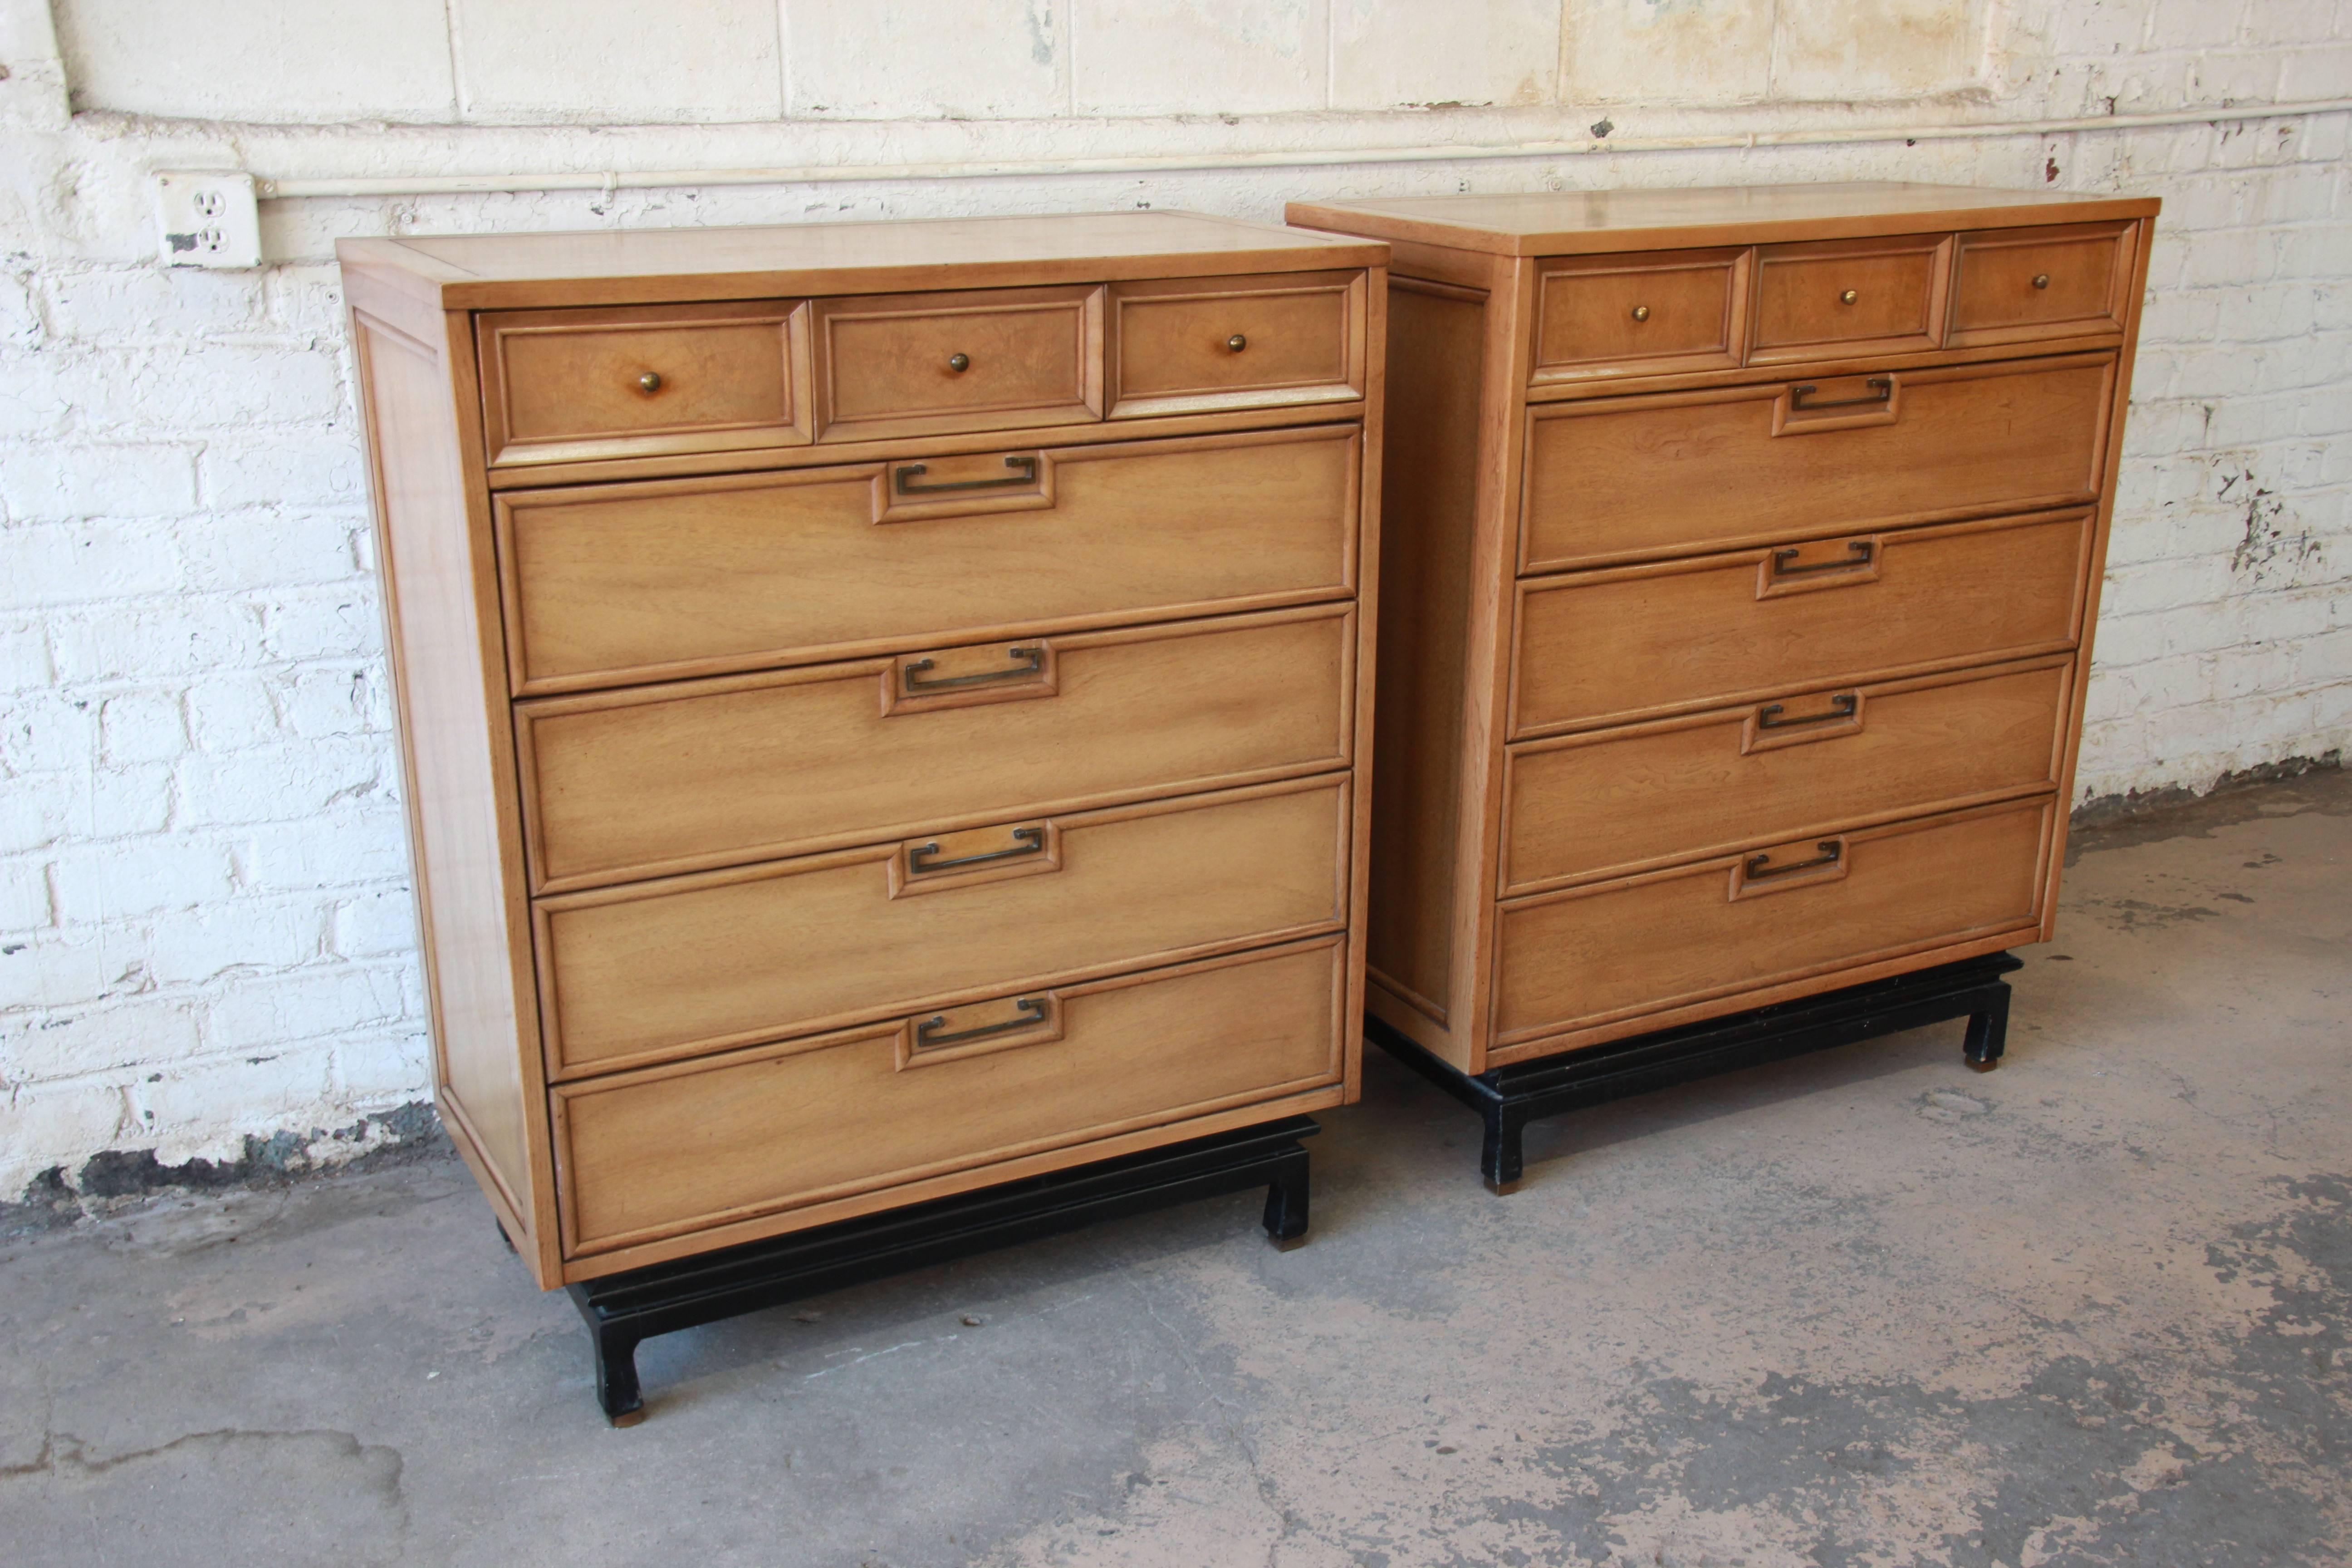 Your choice of two gorgeous Mid-Century Modern Hollywood Regency chinoiserie highboy dressers designed by Merton Gershun for American of Martinsville. The dressers feature beautiful bleached walnut wood grain and original brass drawer pulls. They